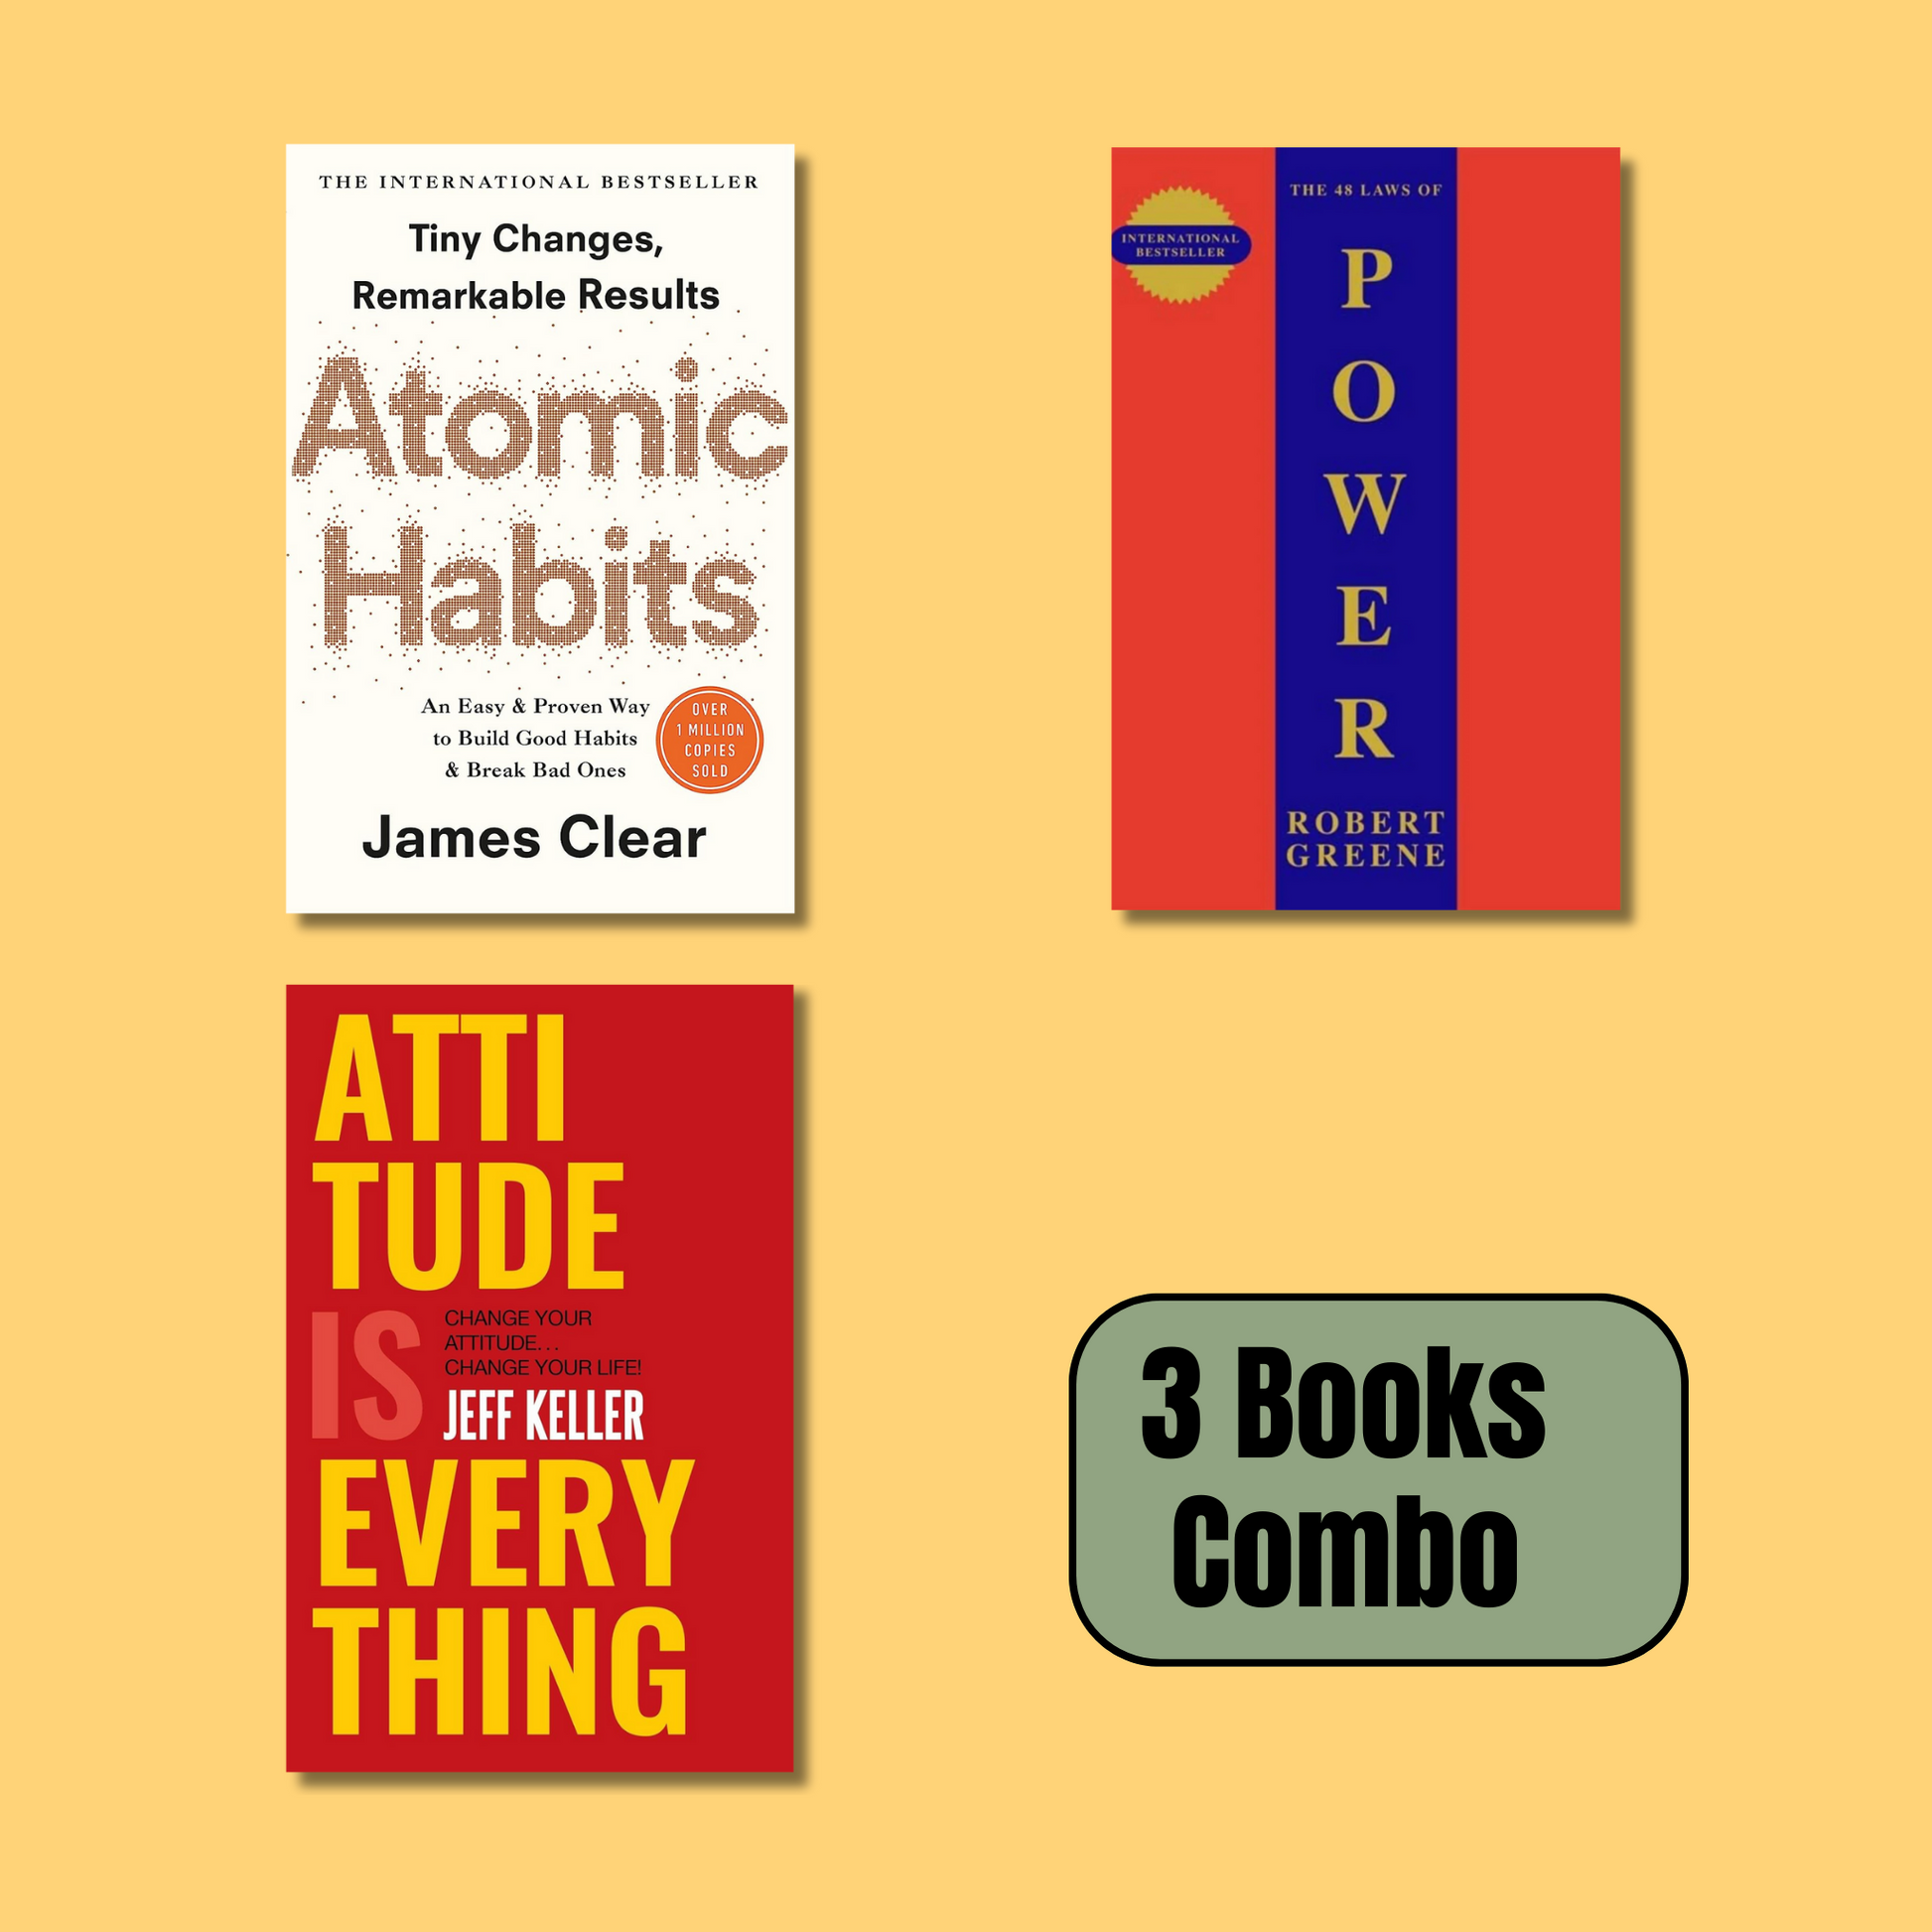 Combo] Atomic Habit-48 Laws Of Power-Attitude Is Everything (Paperback) -  Gyaanstore